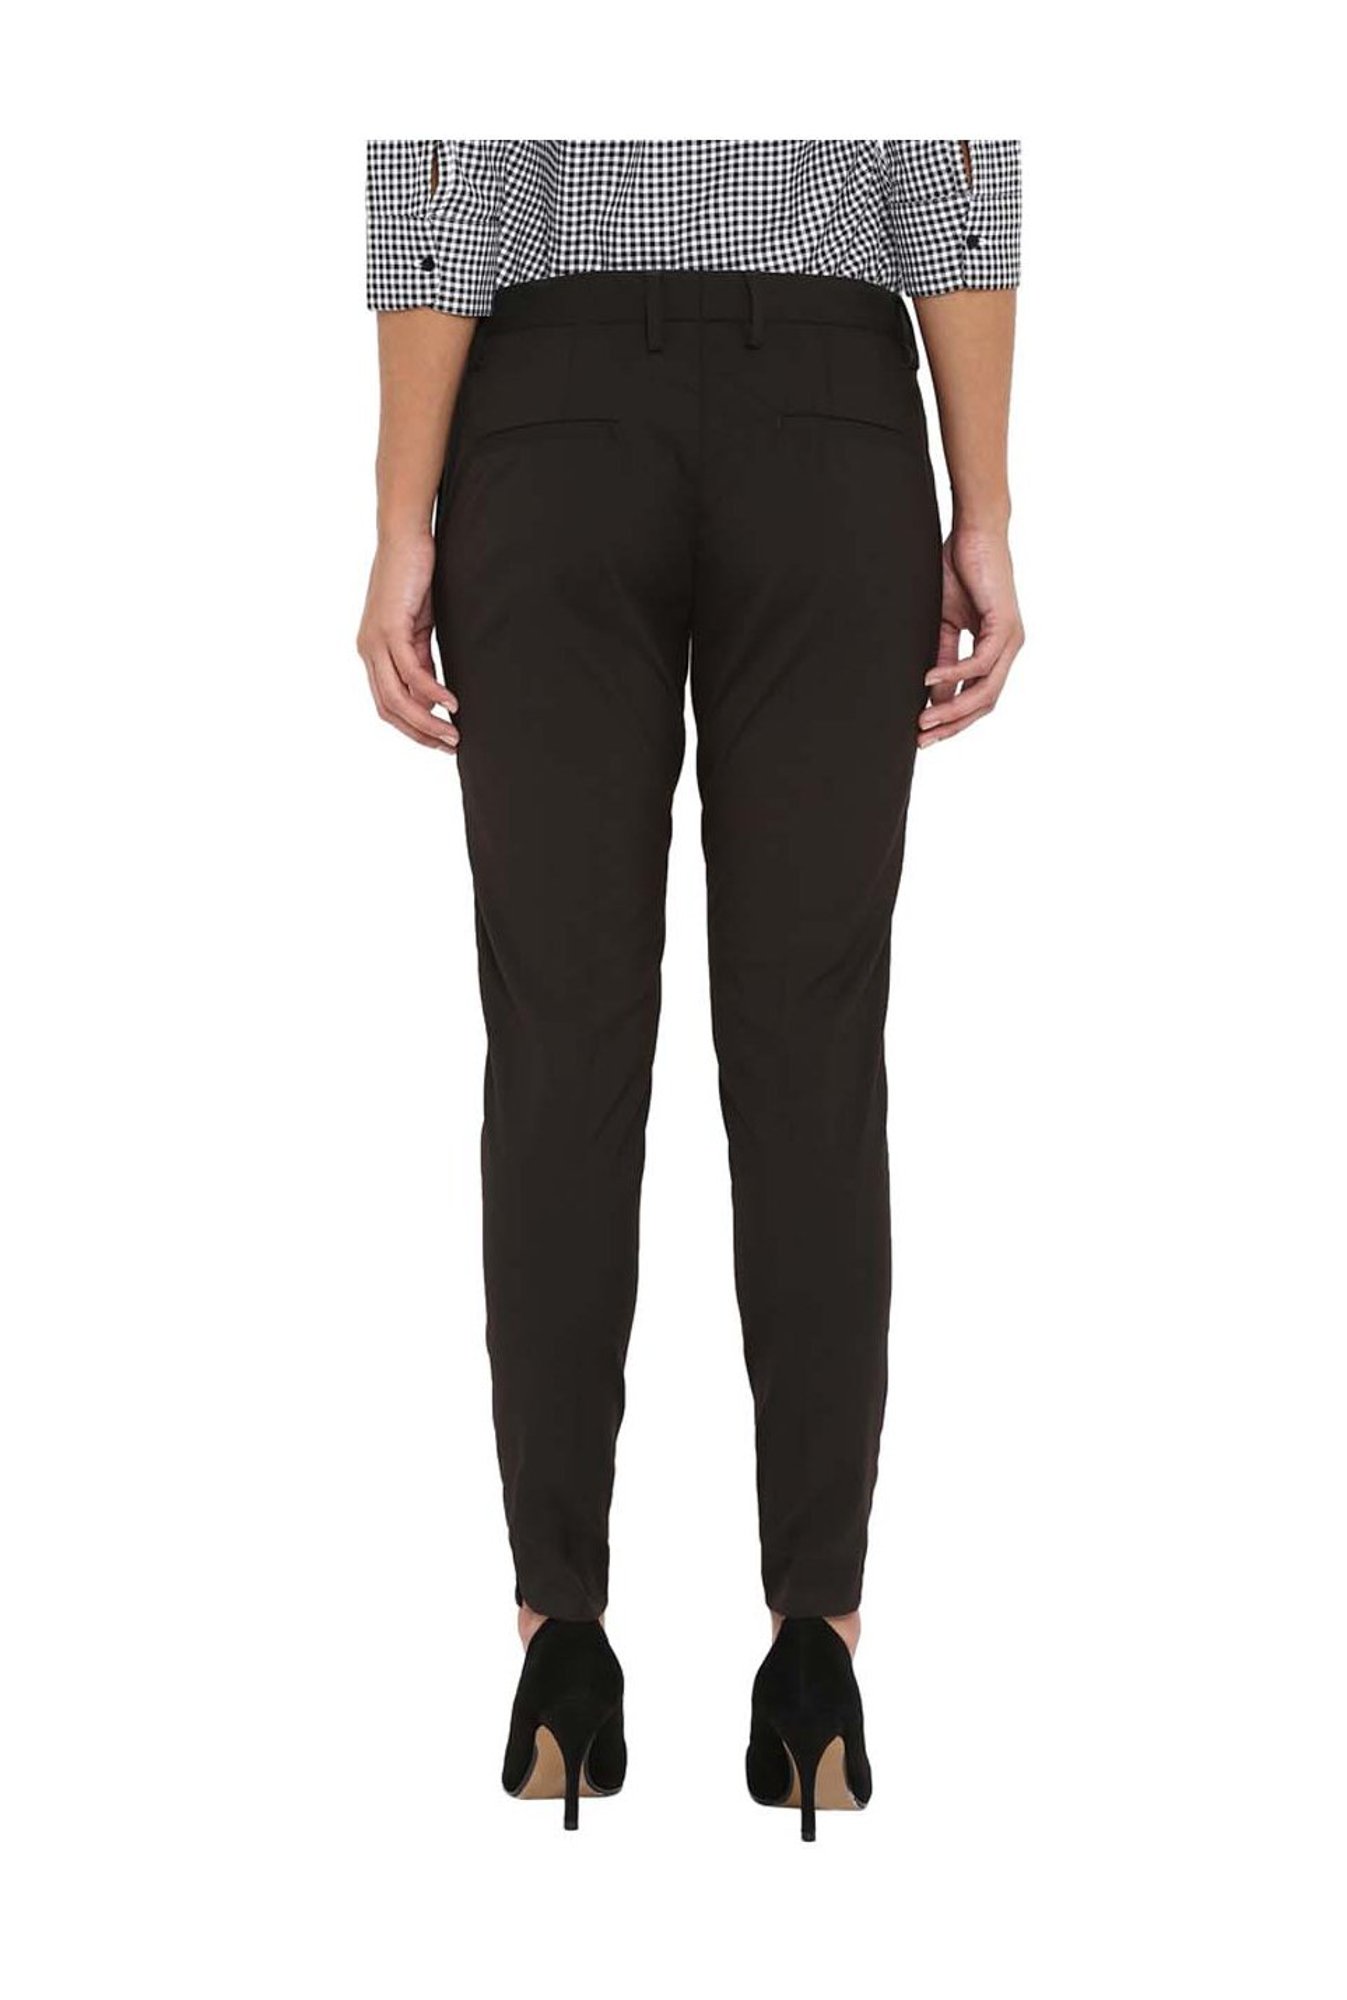 TINTED Trousers and Pants  Buy TINTED Black Formal Pants For Women Online   Nykaa Fashion